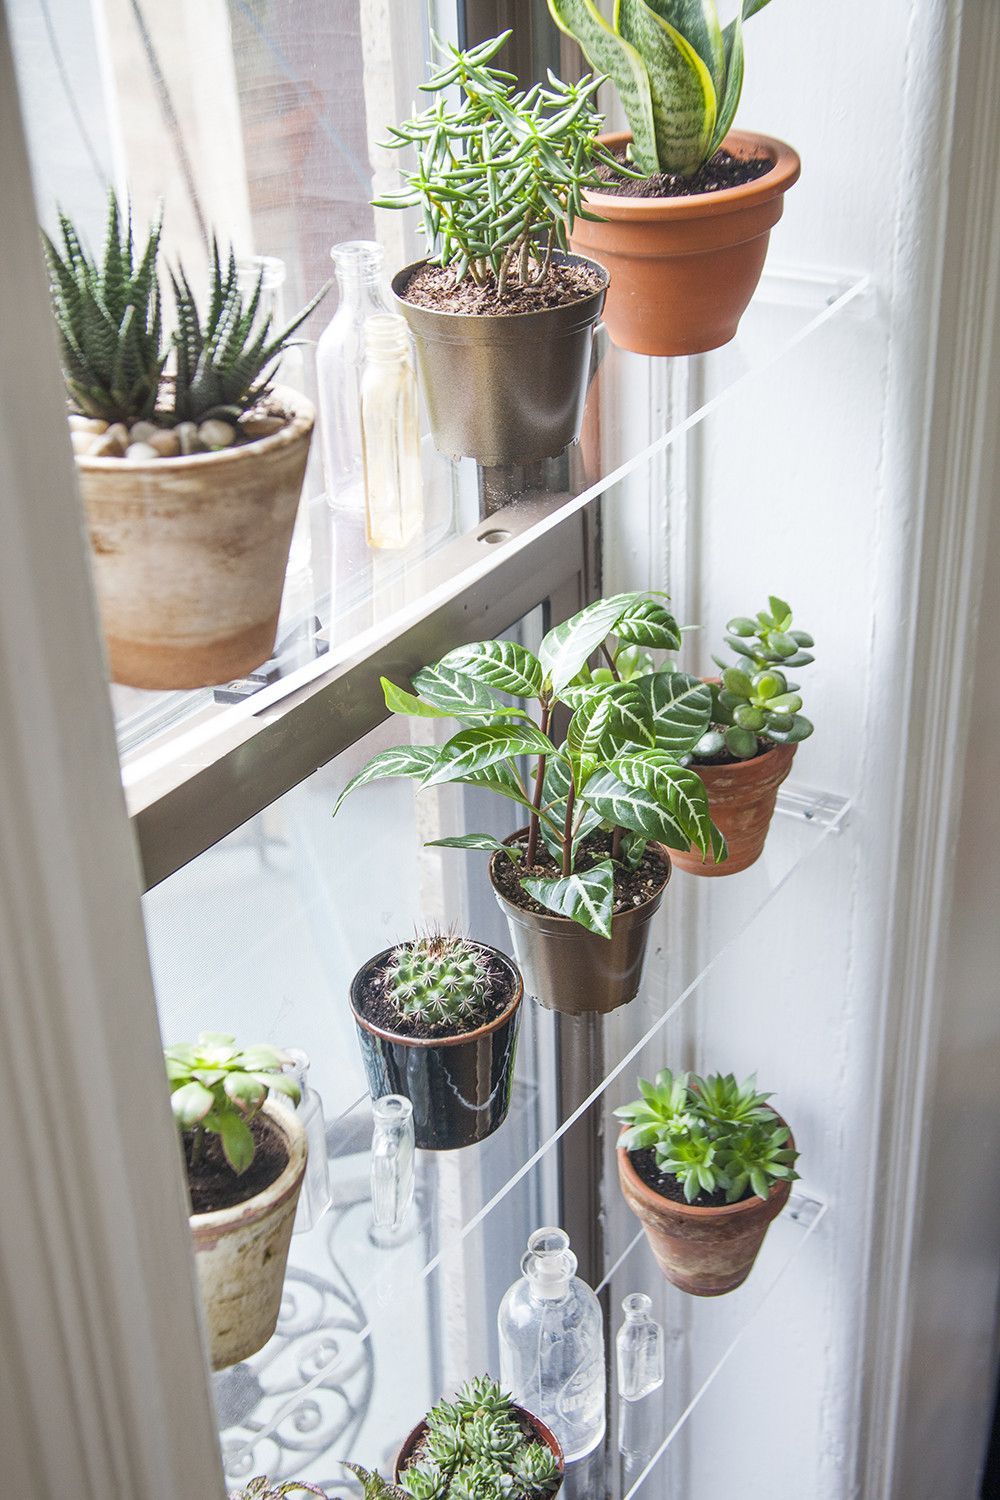 These DIY Floating Window Shelves are the perfect way to display your plants and ensure they get enough sunlight!